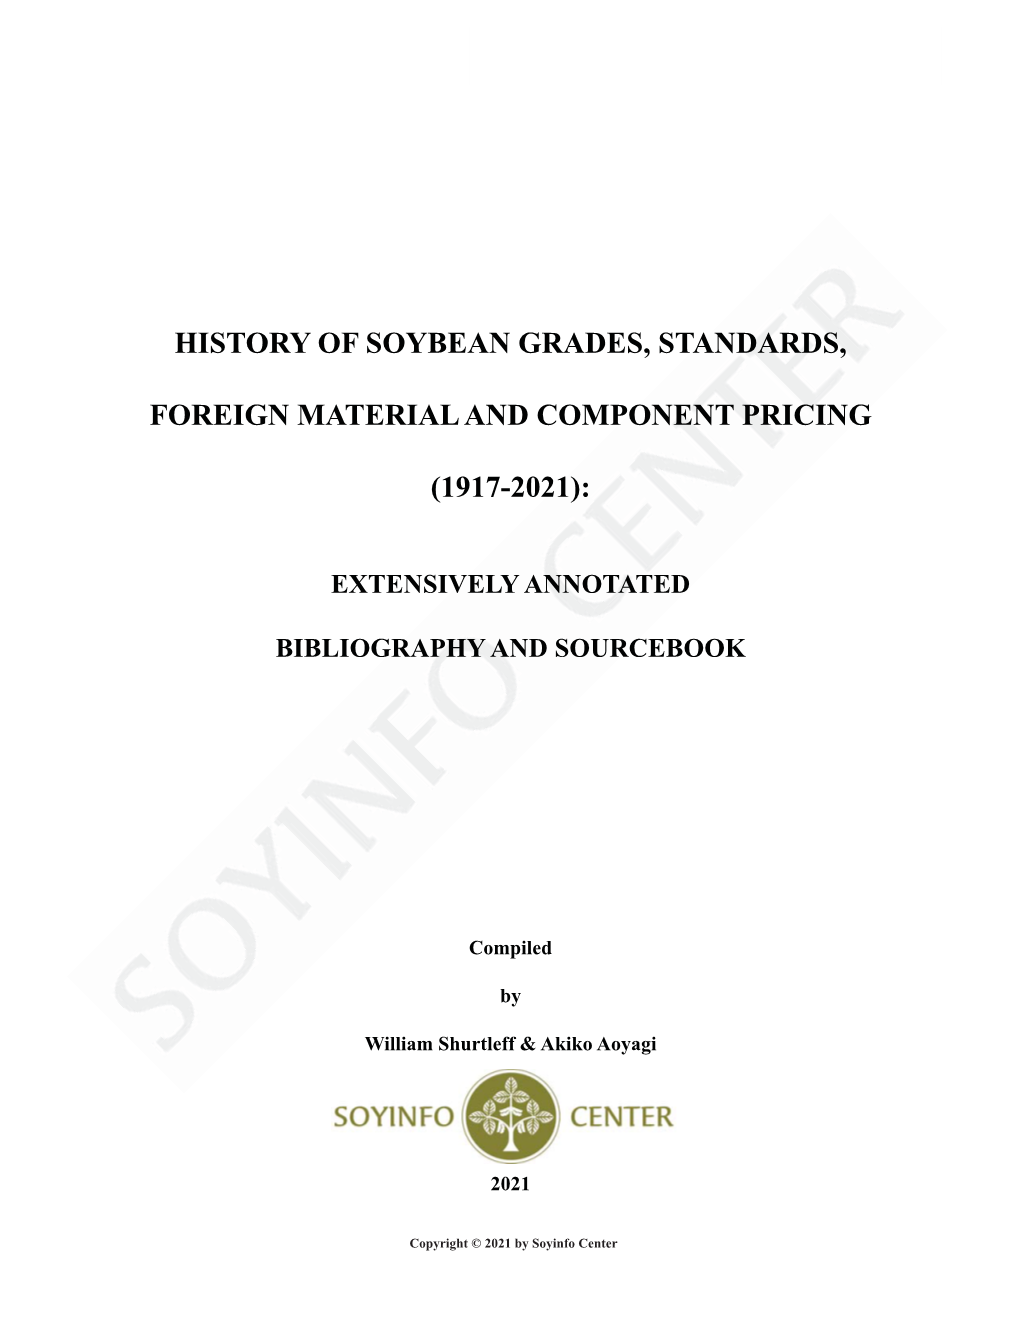 History of Soybean Grades, Standards, Foreign Material and Component Pricing (1917-2021)